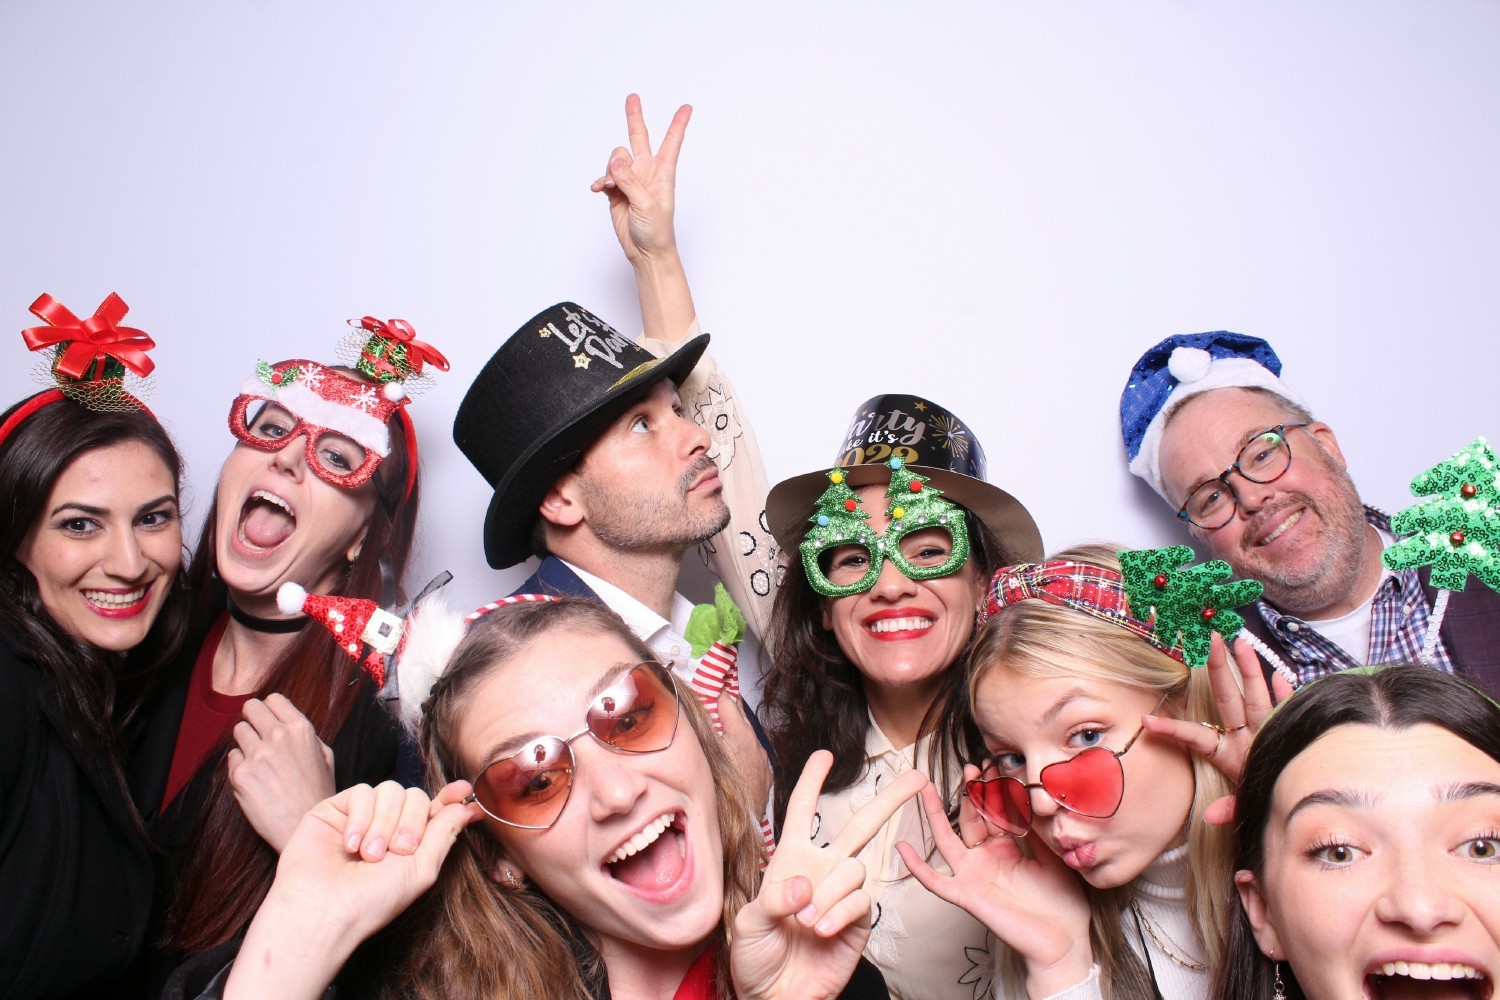 Our Investor Relations & Capital Market Teams Know How to Have a Good Time